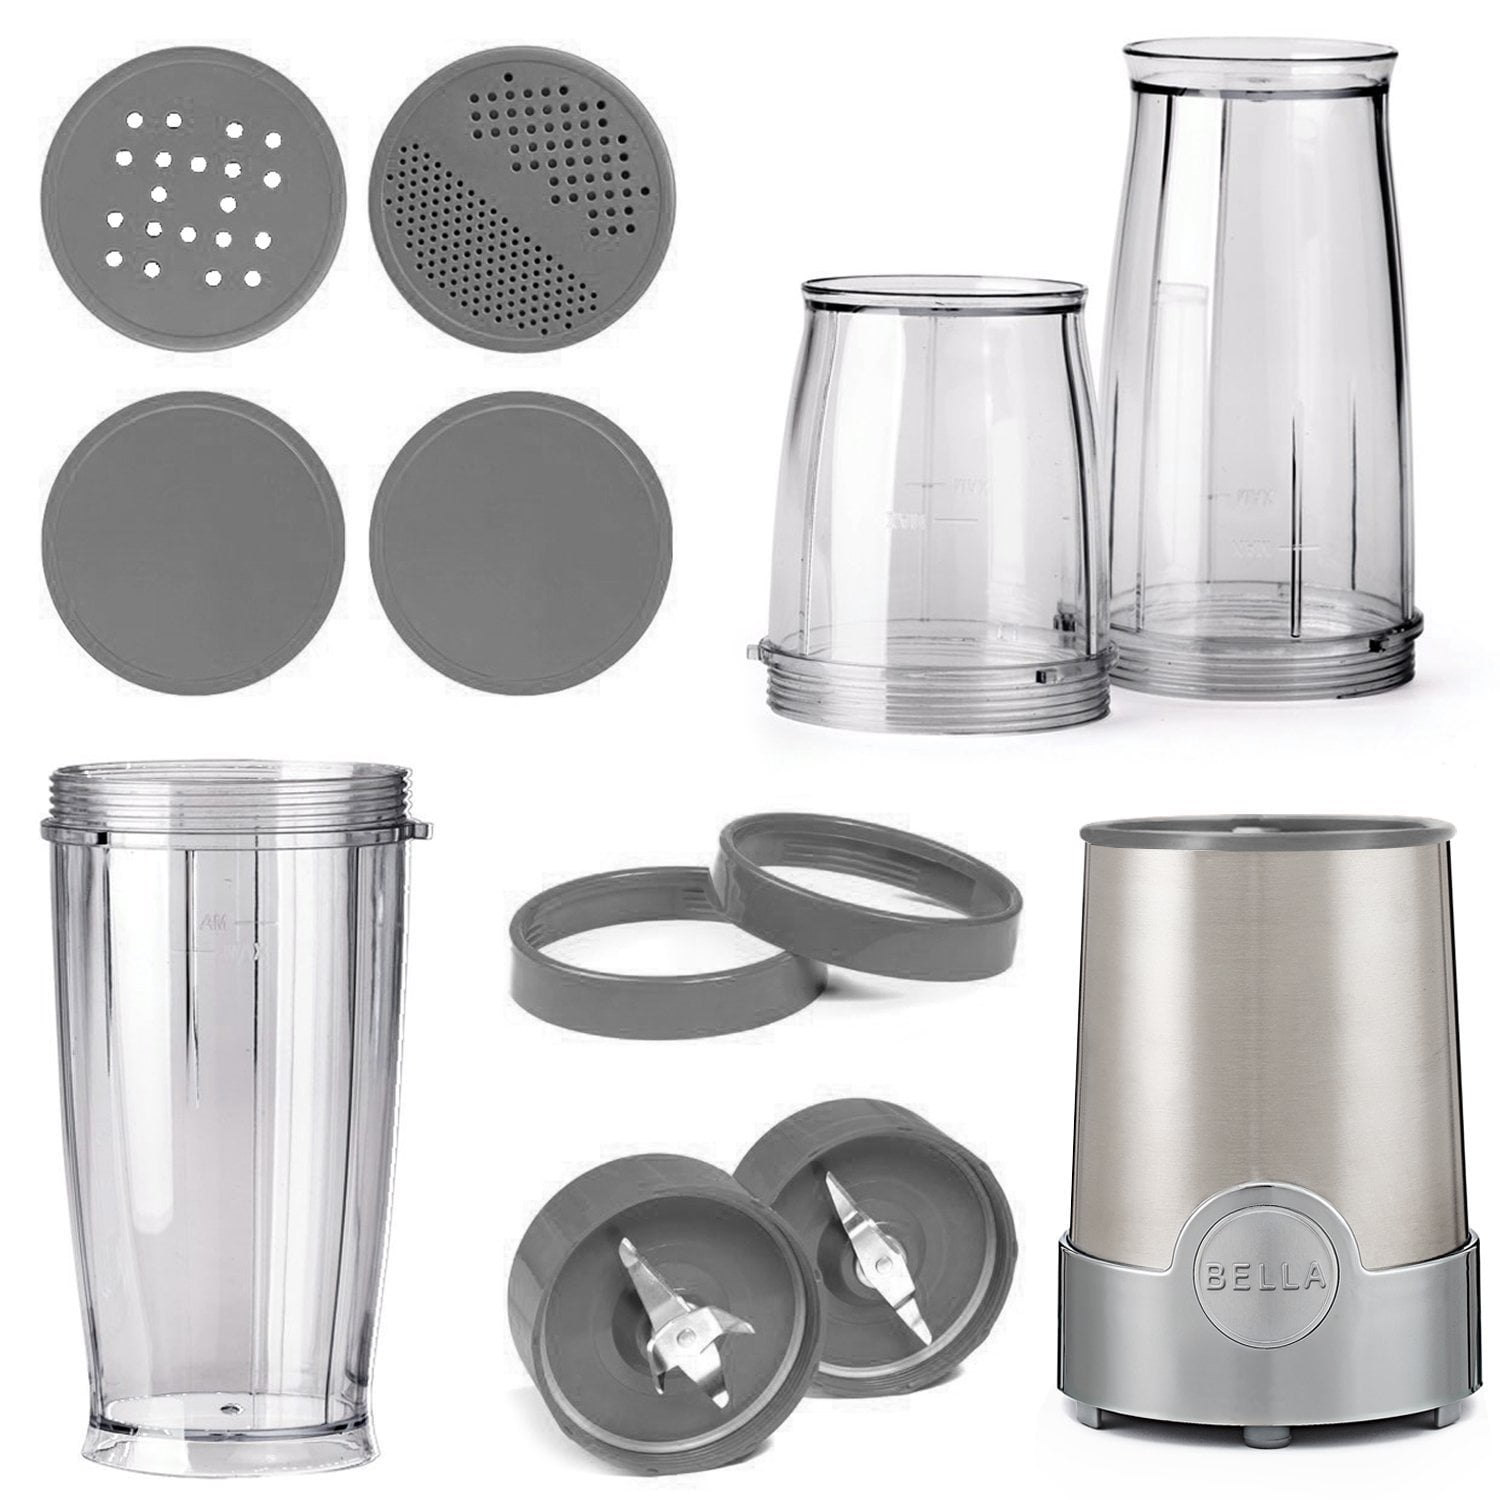 BELLA Personal Size Rocket Blender, 12 piece set, color stainless steel and  chrome 